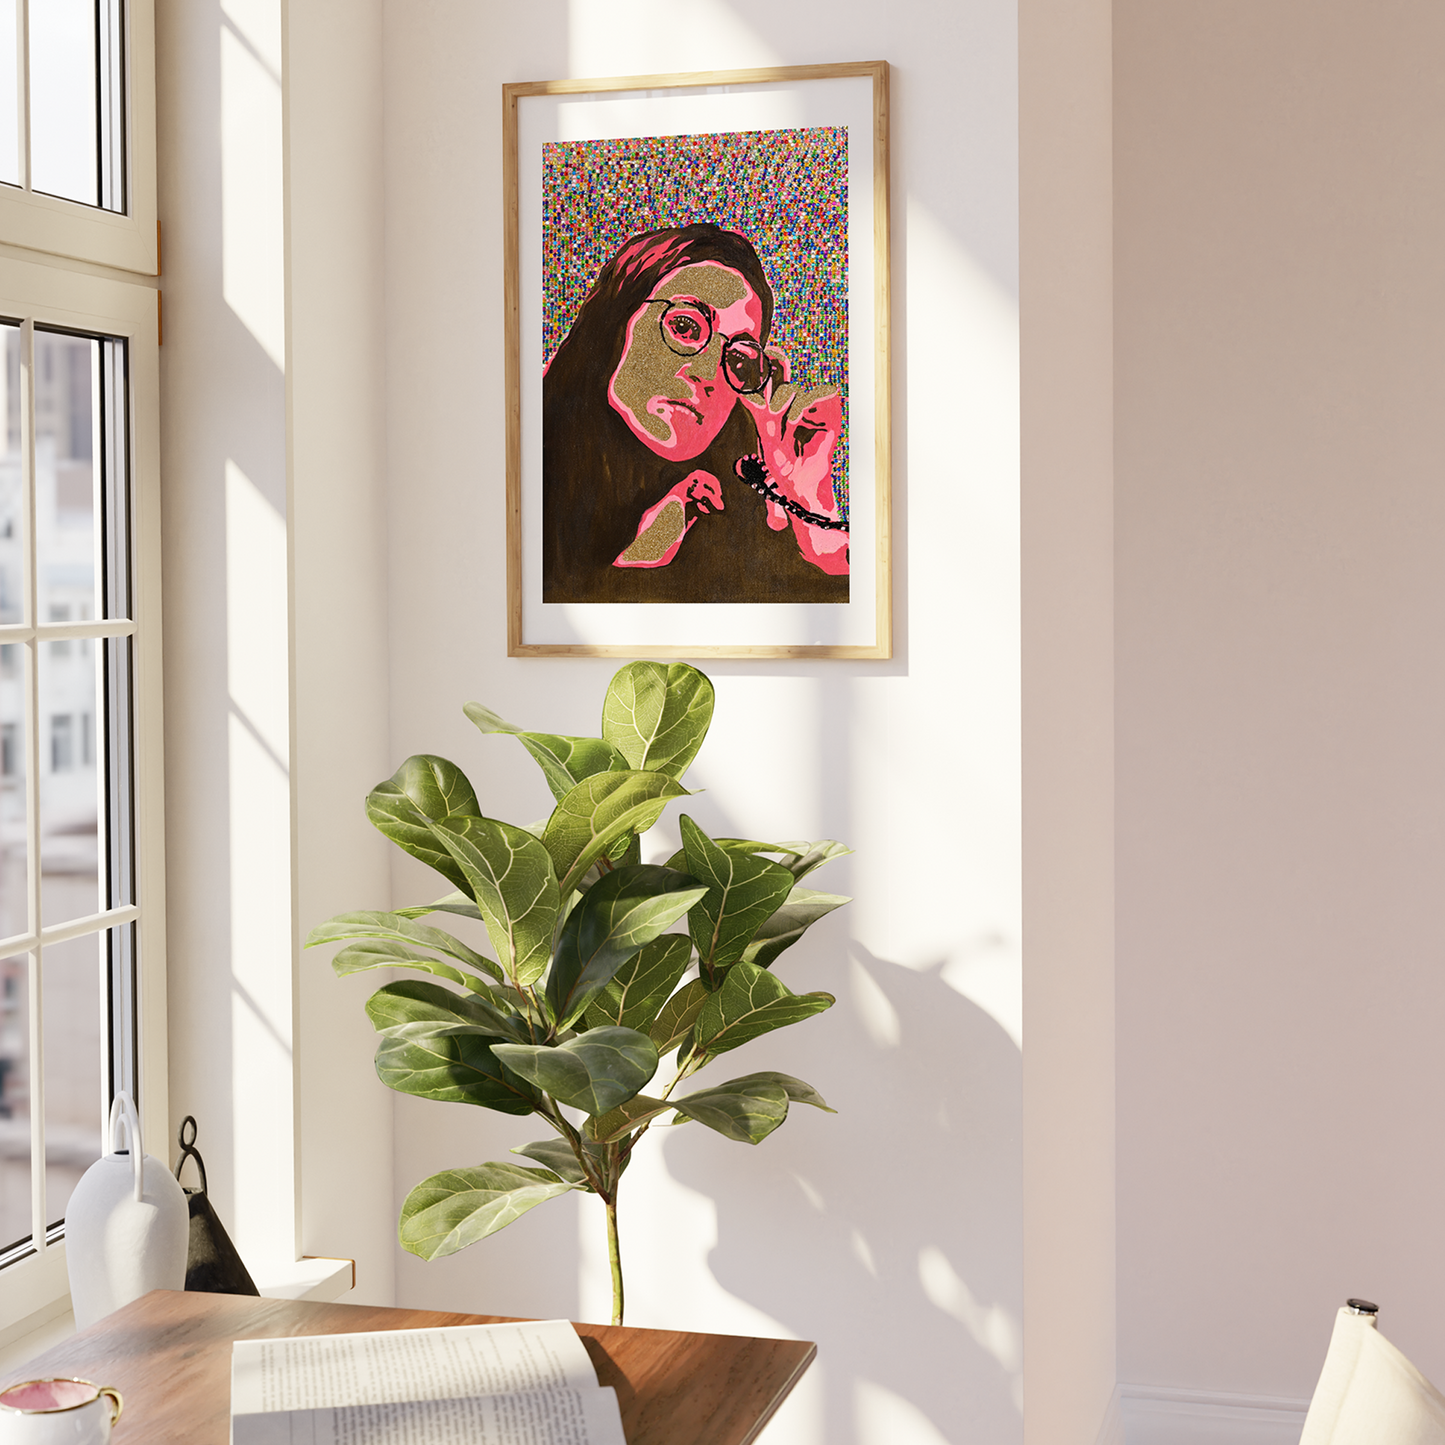 Framed print of AOC Alexandria Ocasio-Cortez, American politician and activist hangs inside a beautiful apartment next to a window on a sunny day